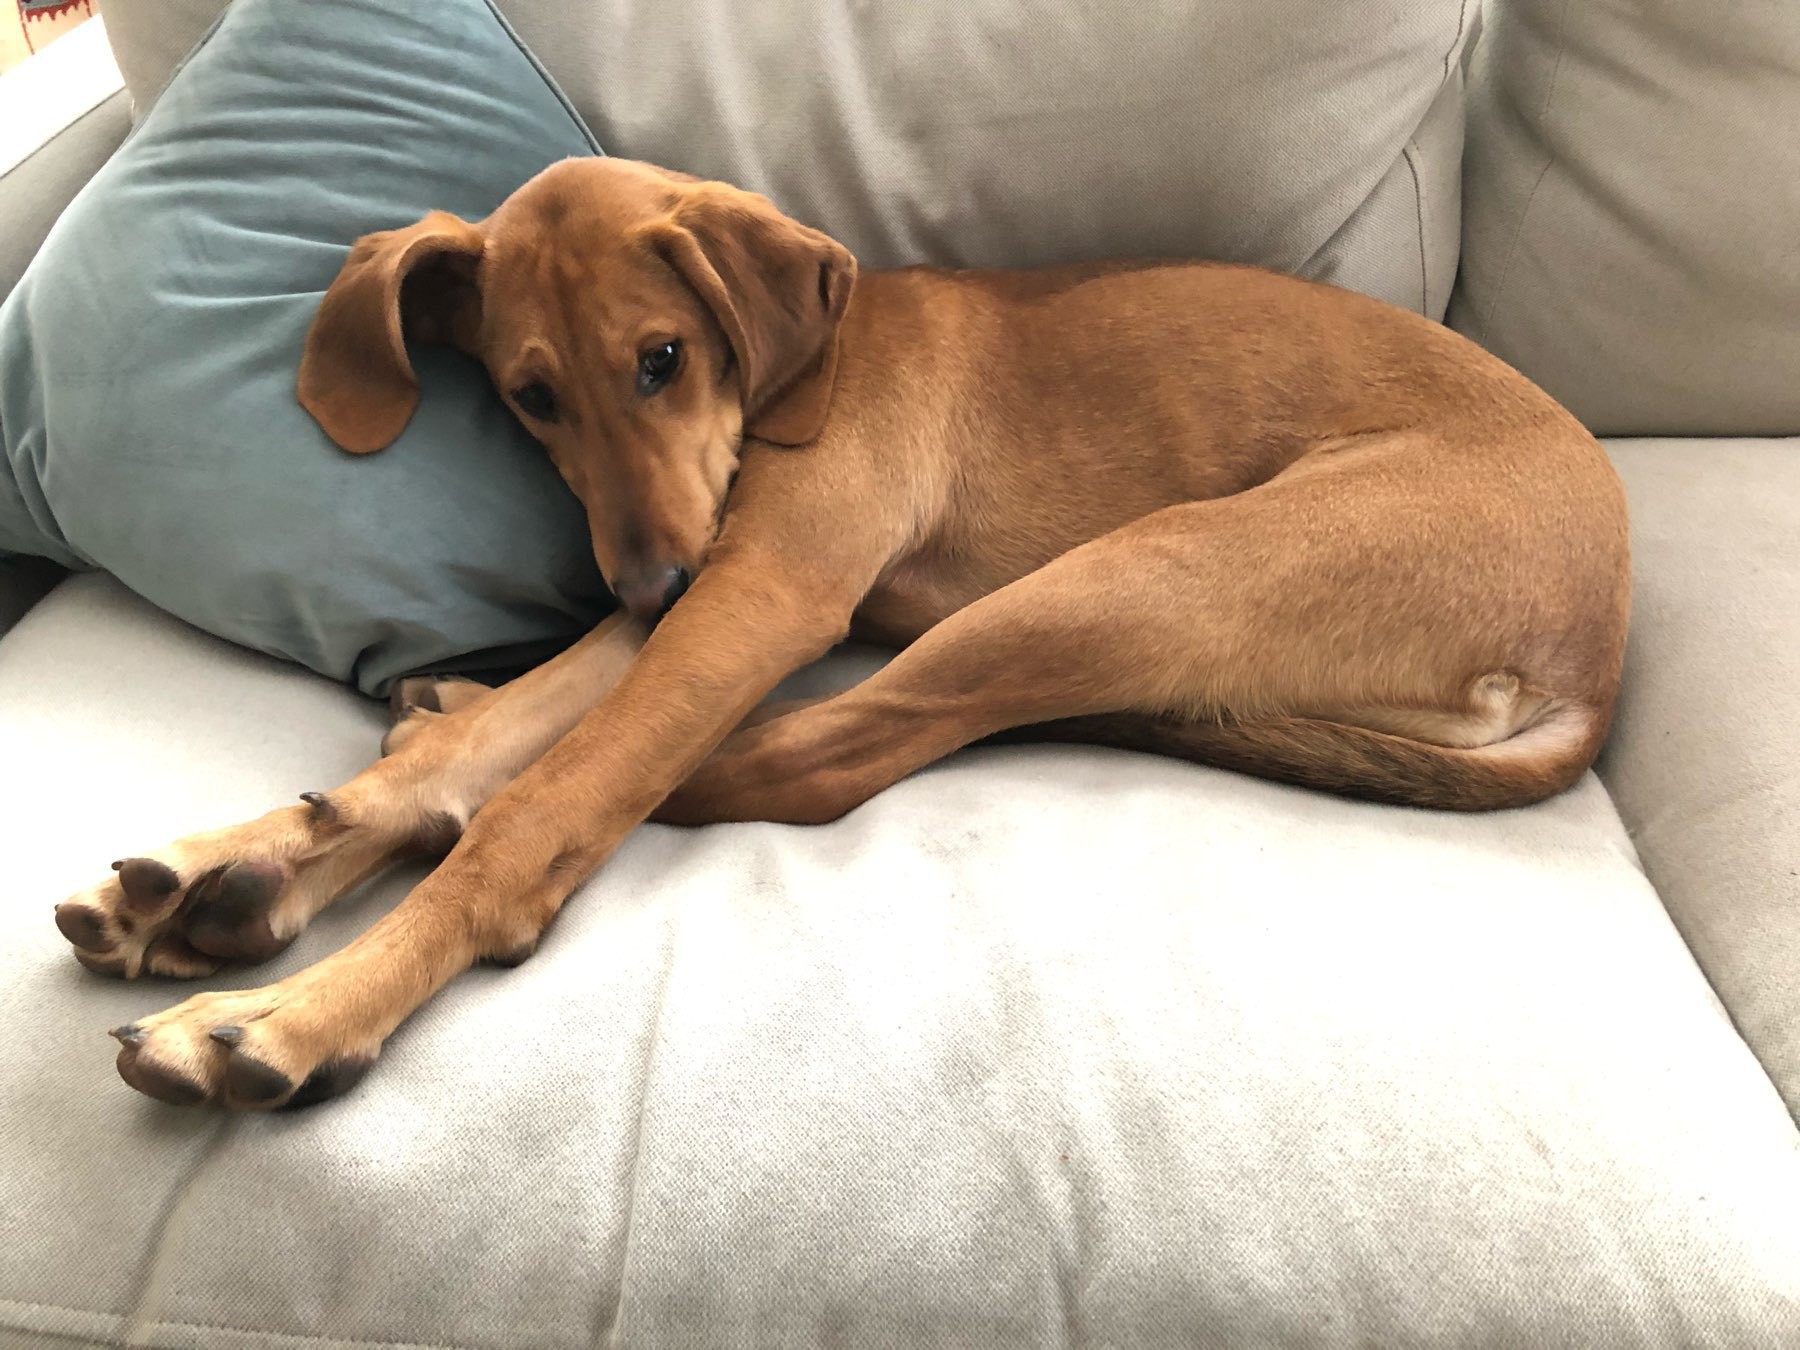 Red hound with long legs takes up most of the couch. 